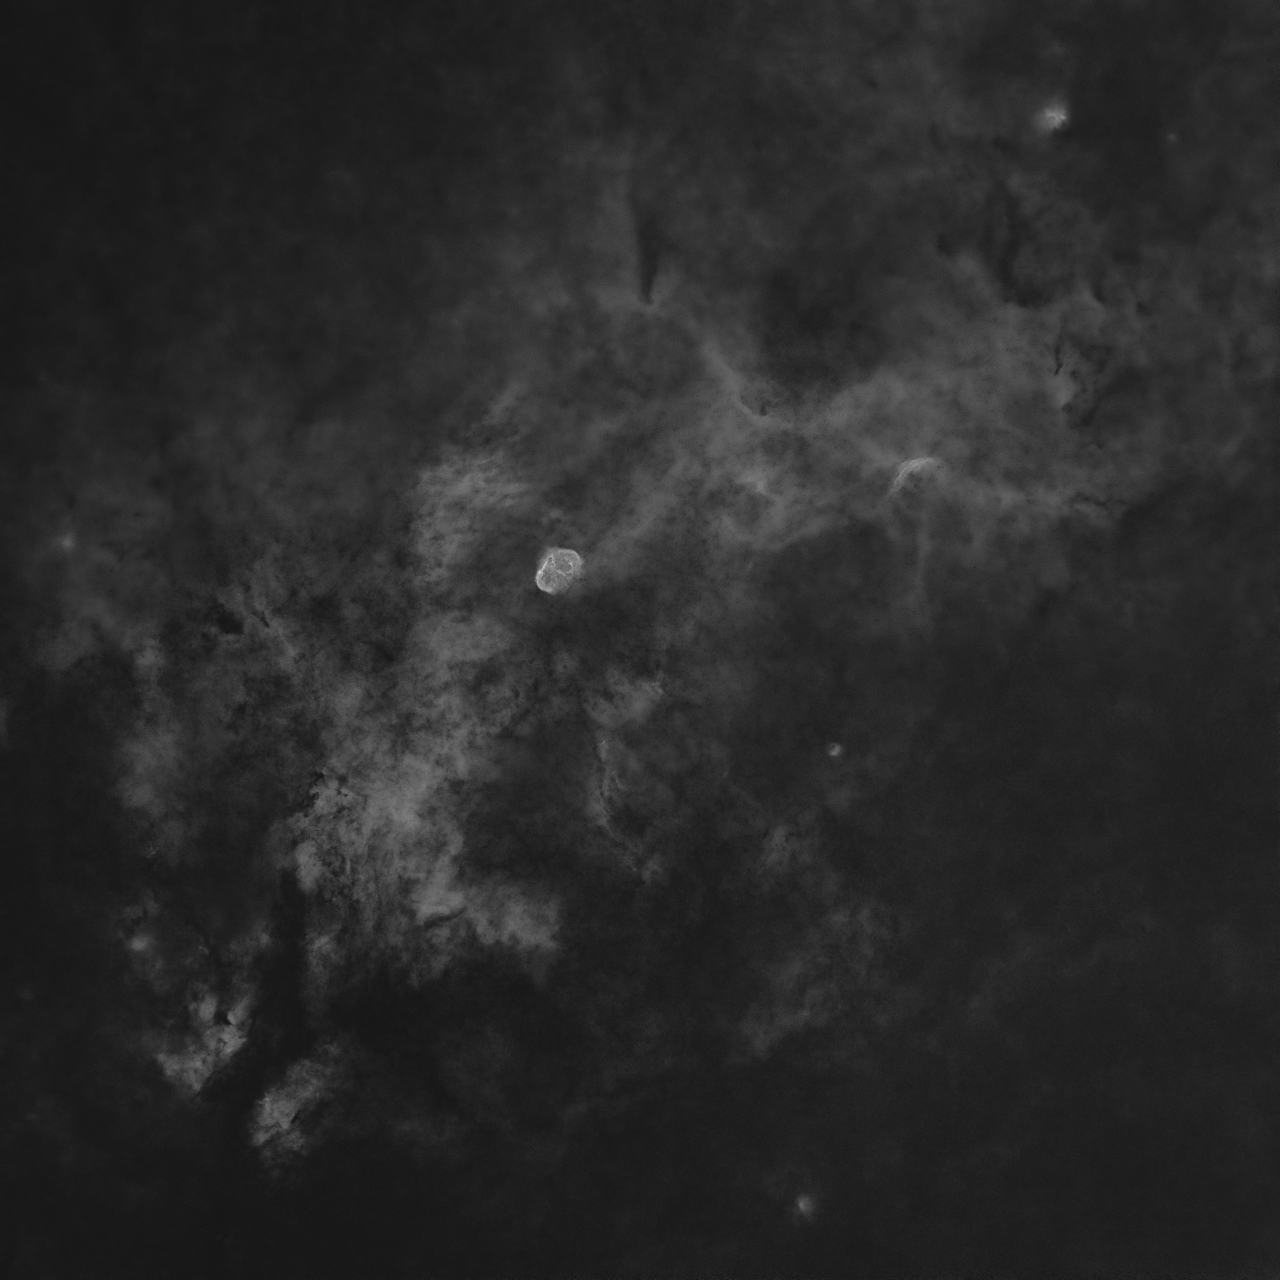 Crescent Oxygen River Oiii 74x360s ESD LN Drizzled 2x Starless QuickEdit jpg